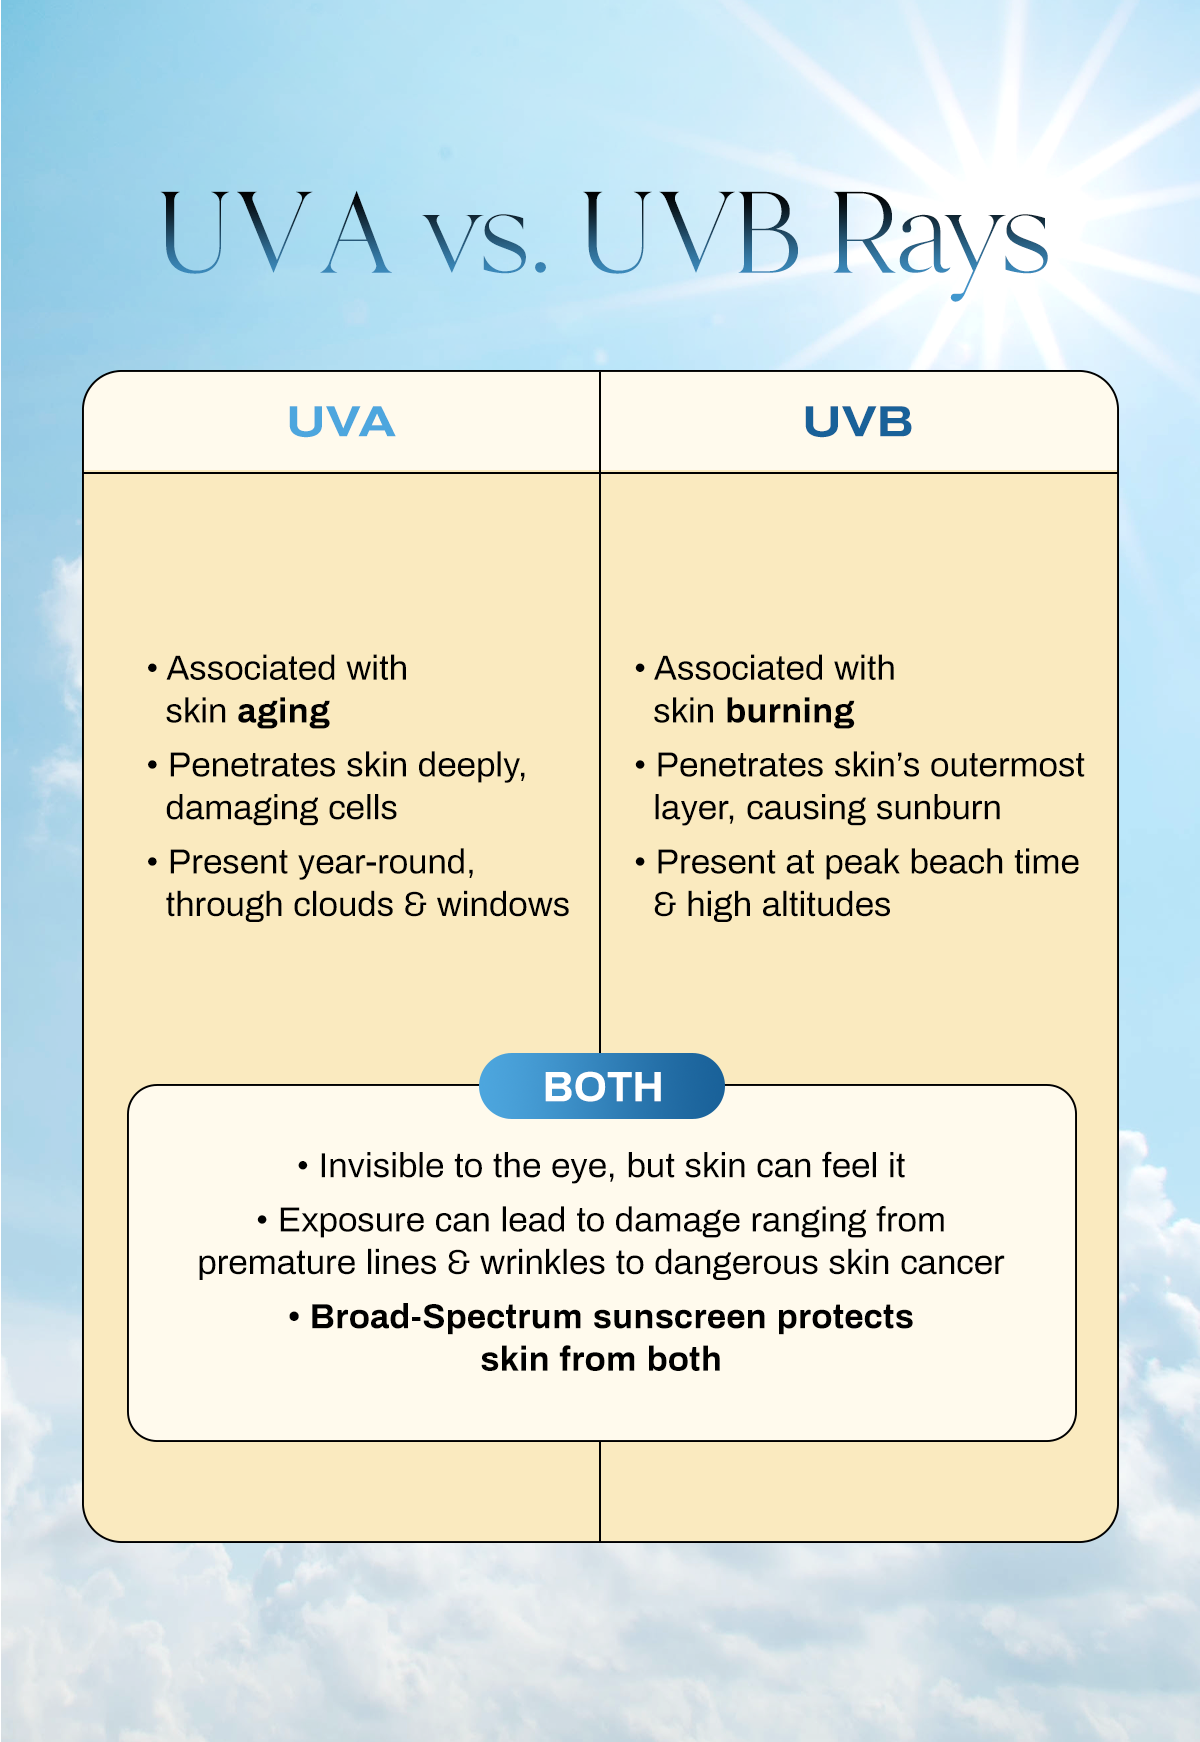 Image of UVA vs UVB Rays | UVA associated with skin aging, penetrates skin deeply, damaging cells, and present year-round, through clouds & windows. UVB is associated with skin burning, penetrates skin's outermost layer, causing sunburn, and present at peak beach time & high altitudes. Both are invisible to the eye, but skin can feel it. Exposure can lead to damage ranging from premature lines & wrinkles to dangerous skin cancer. Broad spectrum sunscreen protects skin from both. 